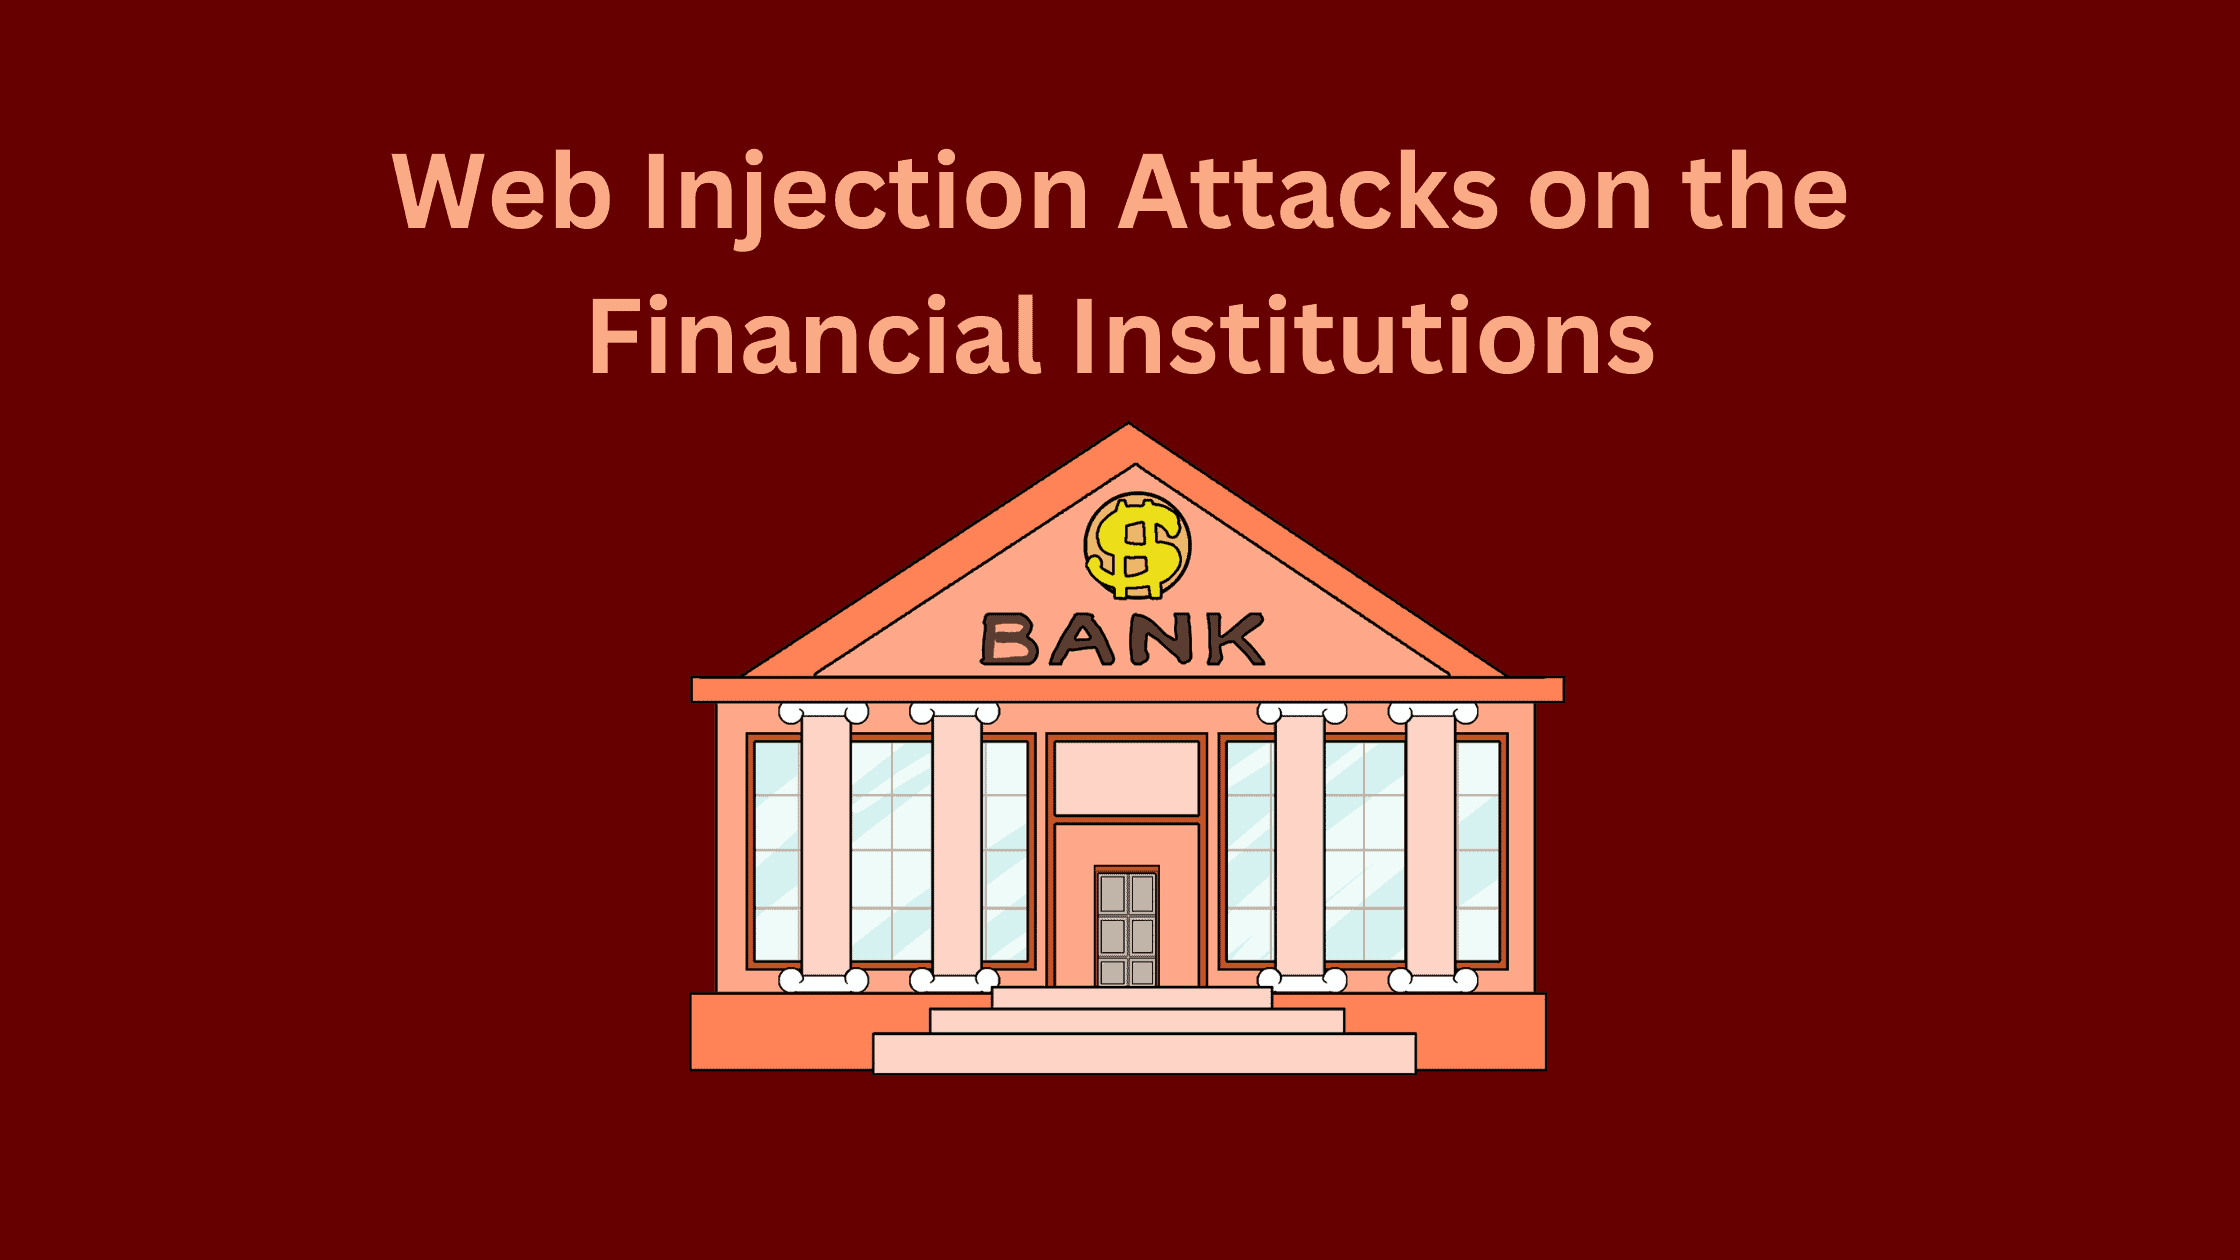 What Security Researcher Says About The Recent Web Injection Attacks On The Financial Institutions